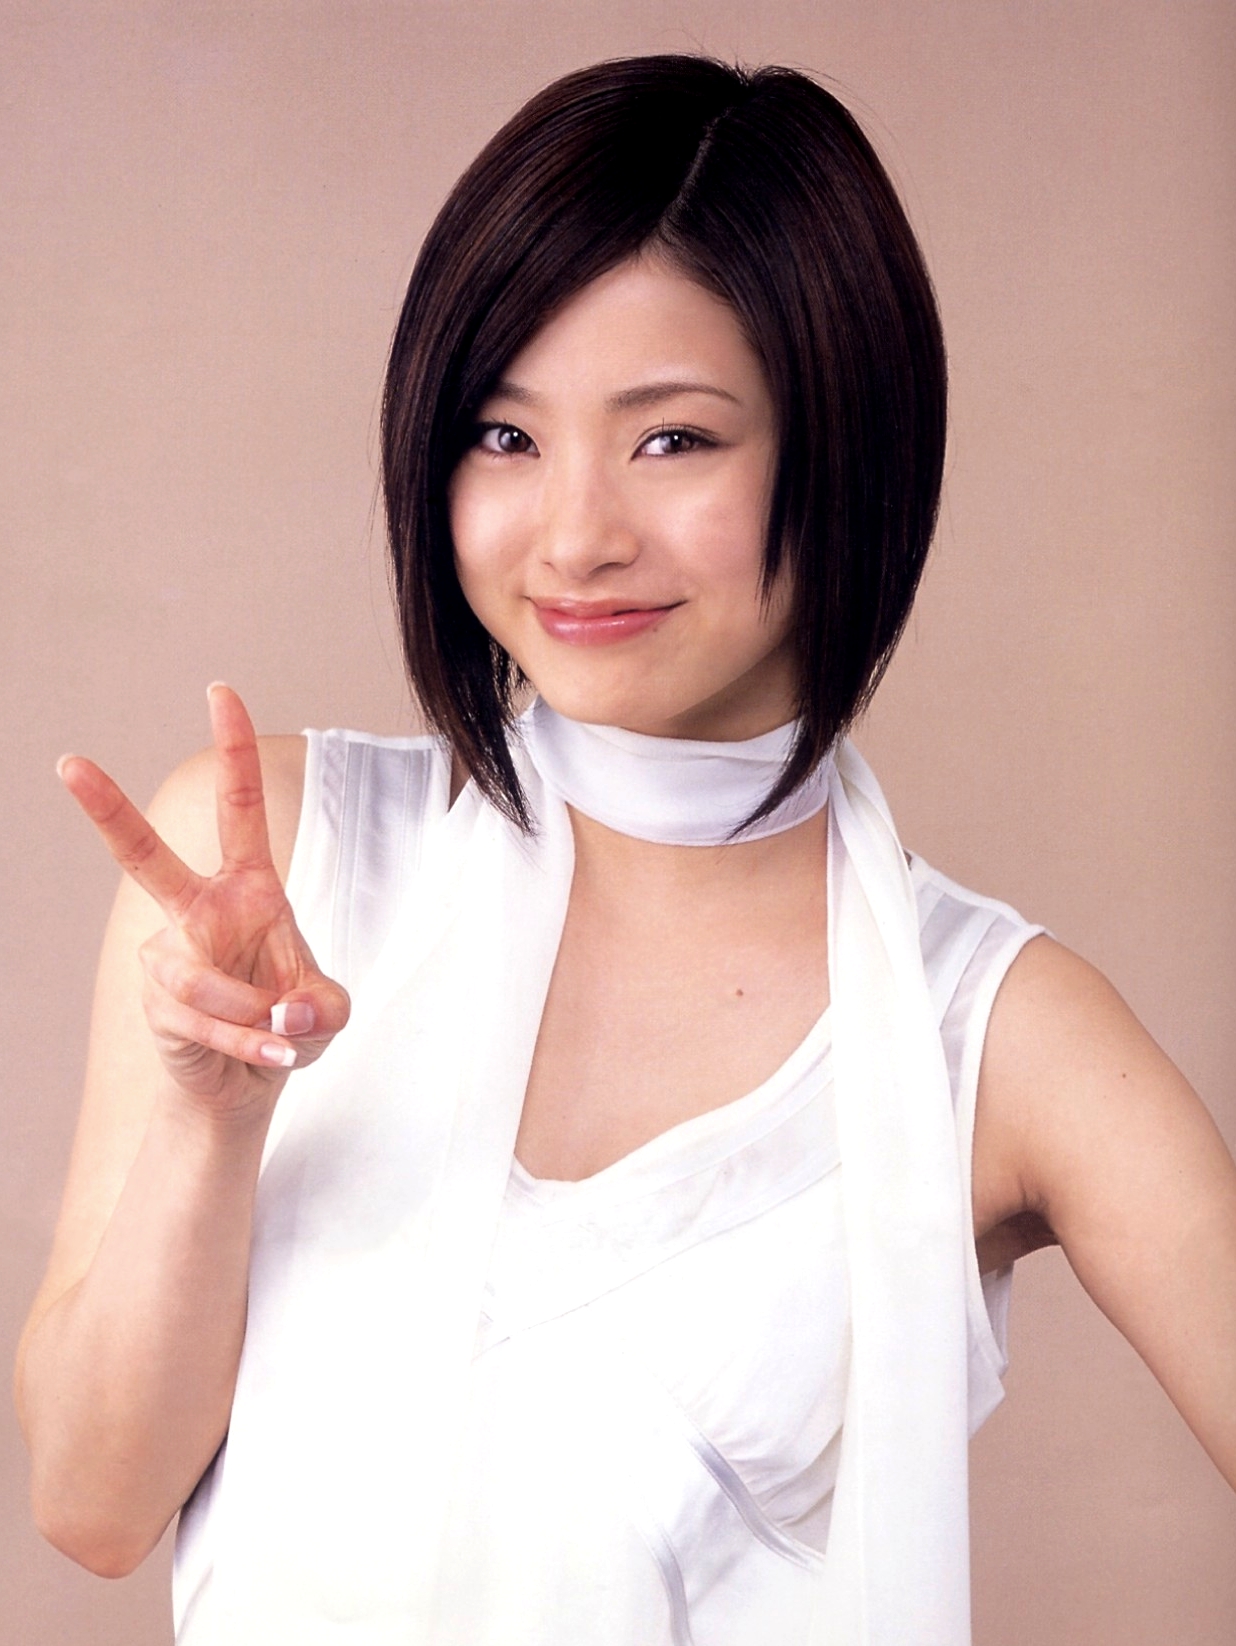 Aya Ueto Backgrounds, Compatible - PC, Mobile, Gadgets| 1236x1646 px